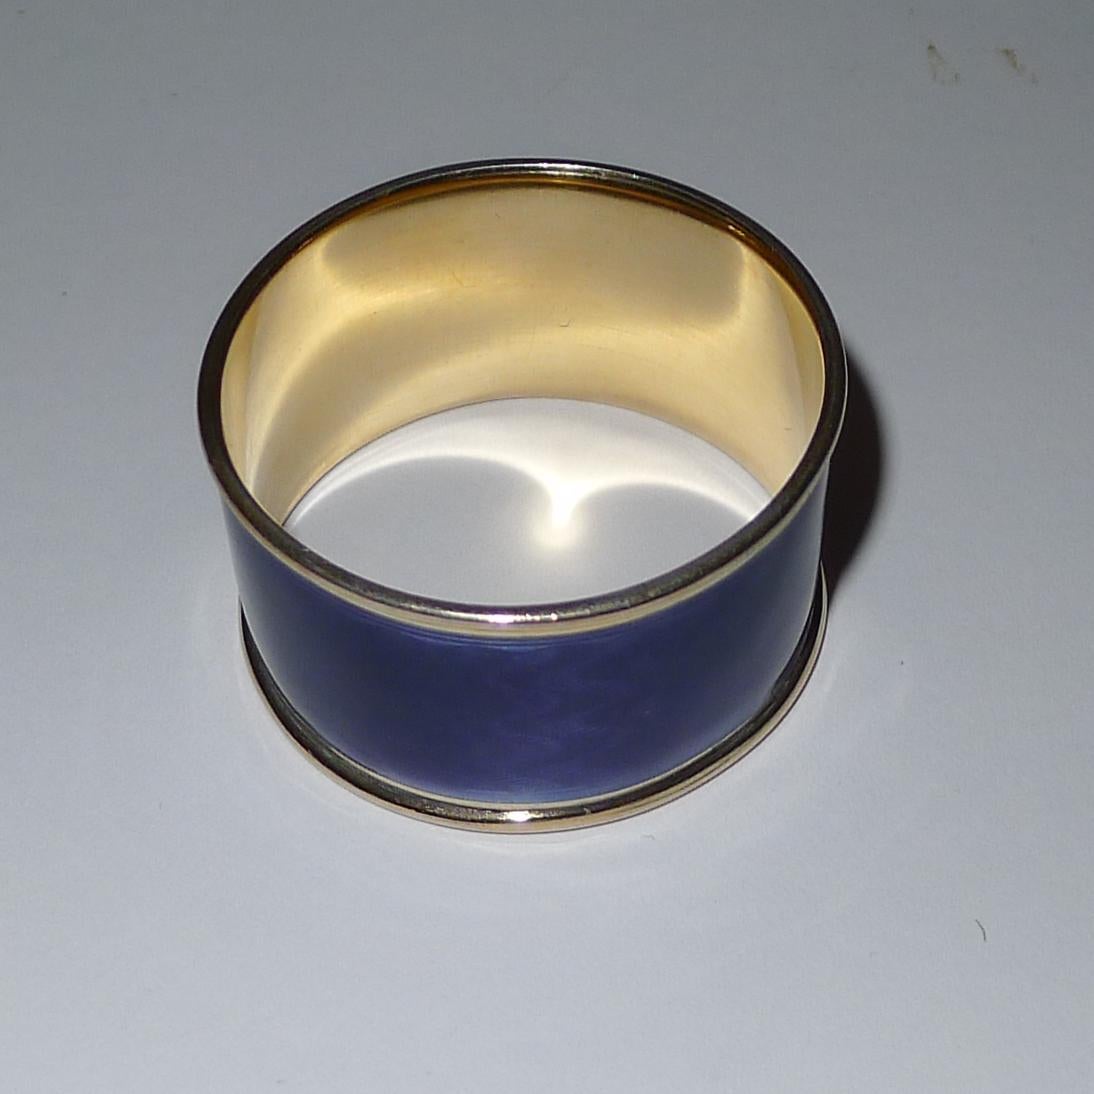 A stunning and rarely found Norwegian napkin ring made by the famous silversmith, David Andersen. 

The ring is made from sterling silver, stamped 925 (925/1000) and lavishly washed in gold; together with the maker's mark for David Andersen.  This